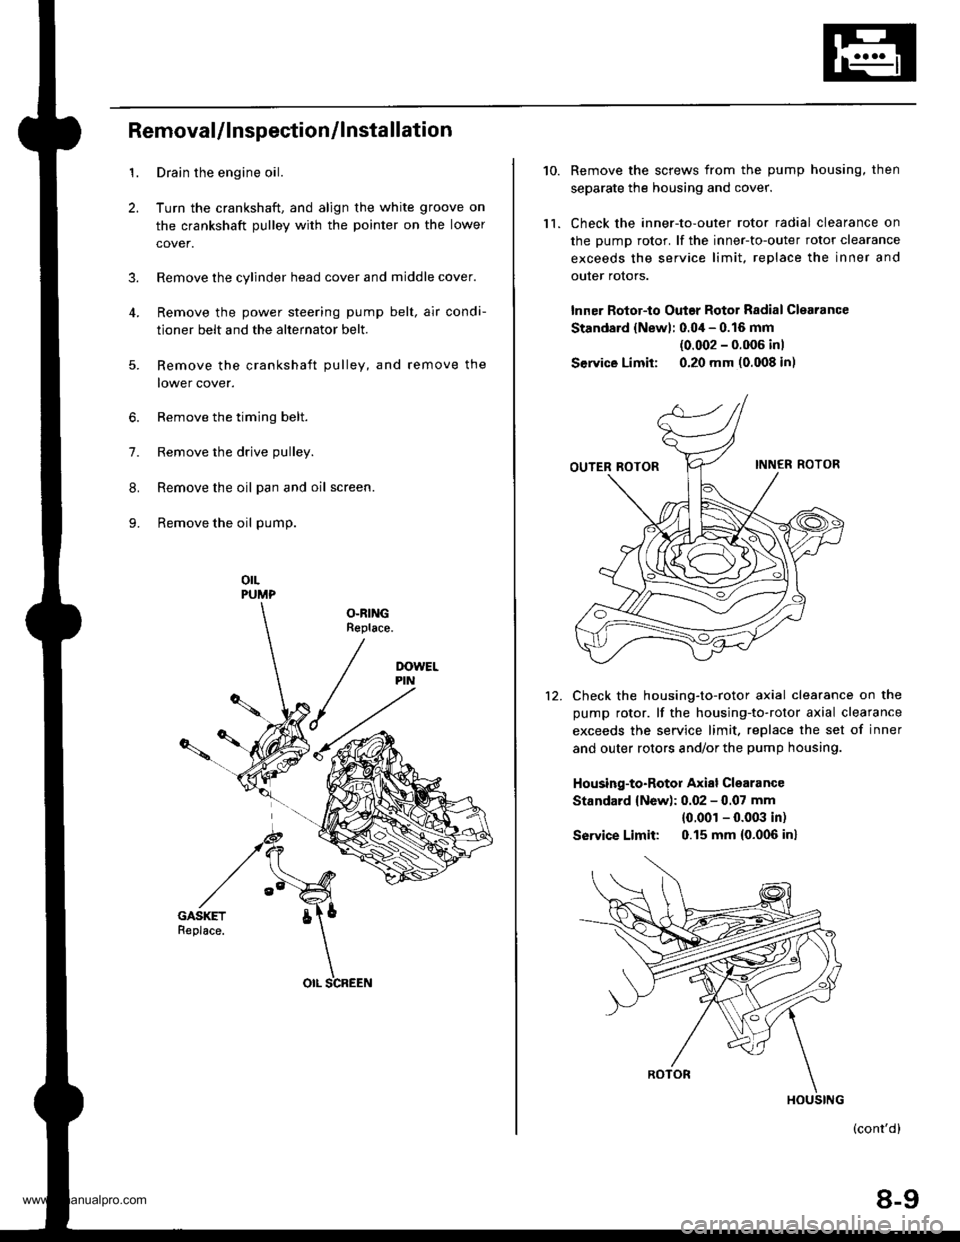 HONDA CR-V 2000 RD1-RD3 / 1.G Owners Manual 
1.
2.
3.
RemovaUlnspection/lnstallation
Drain the engine oil.
Turn the crankshaft, and align the white groove on
the crankshaft pulley with the pointer on the lower
cover.
Remove the cylinder head co